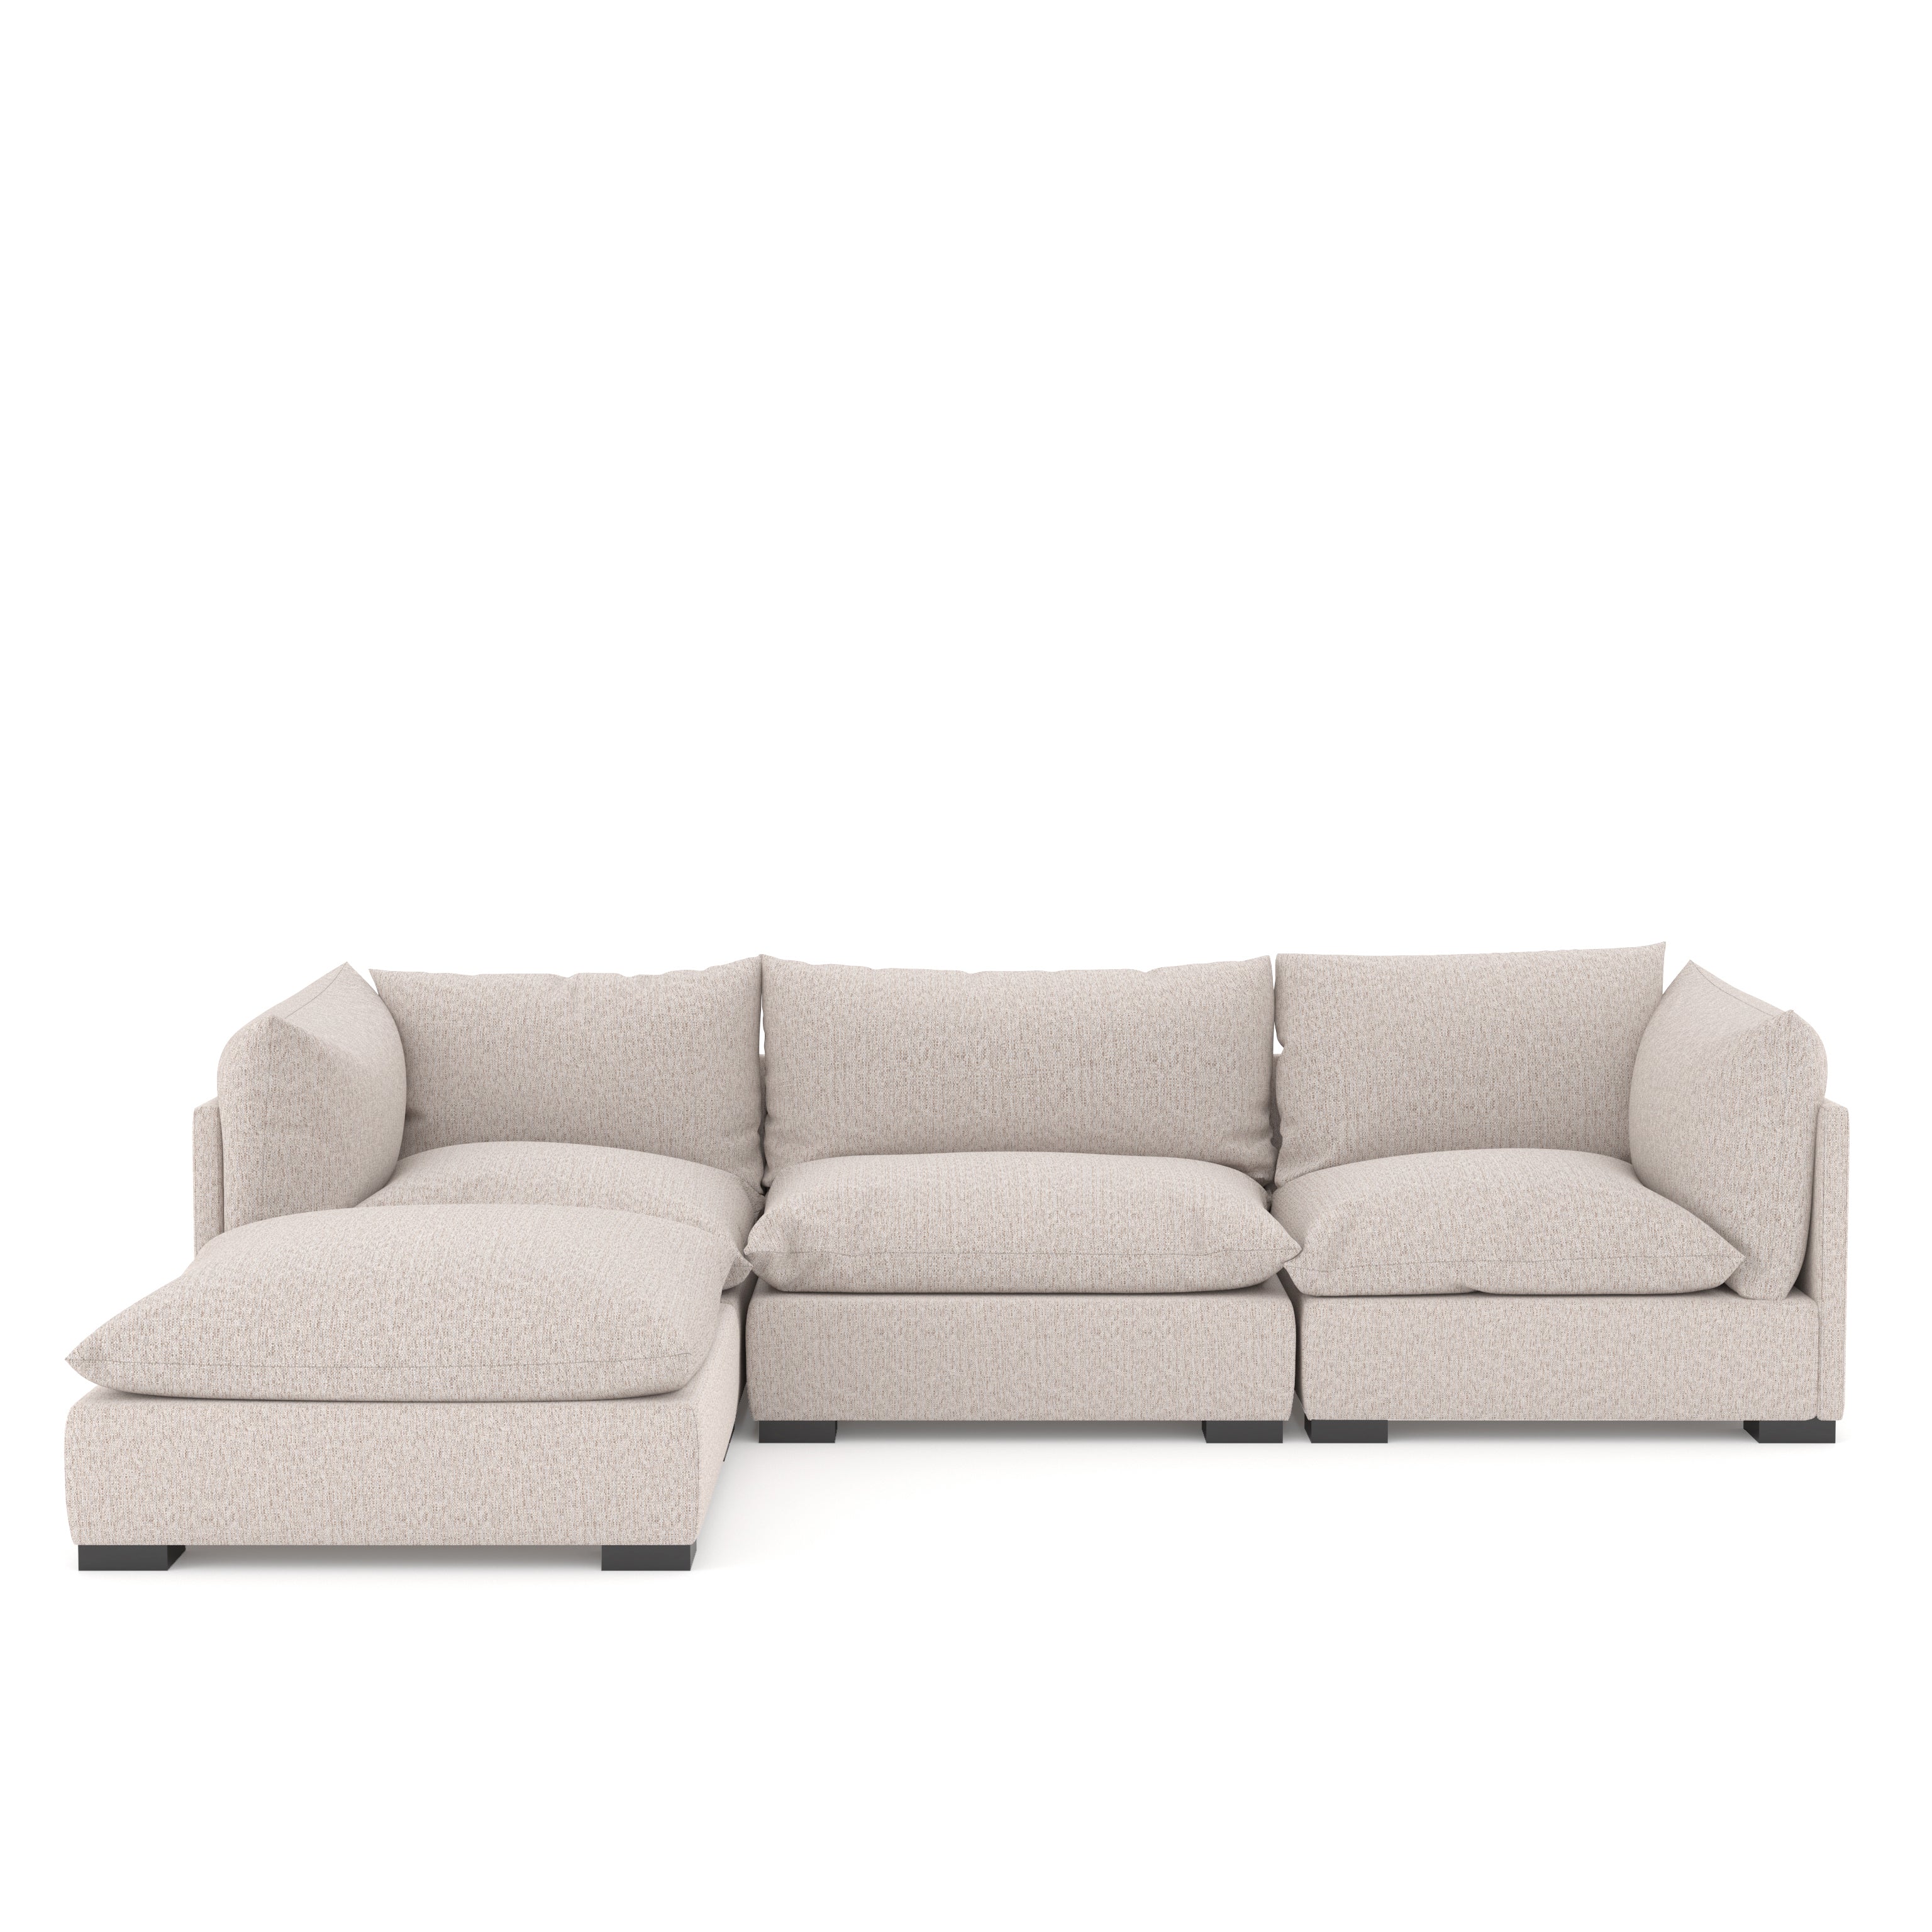 Webster 3-Piece Sectional with Ottoman